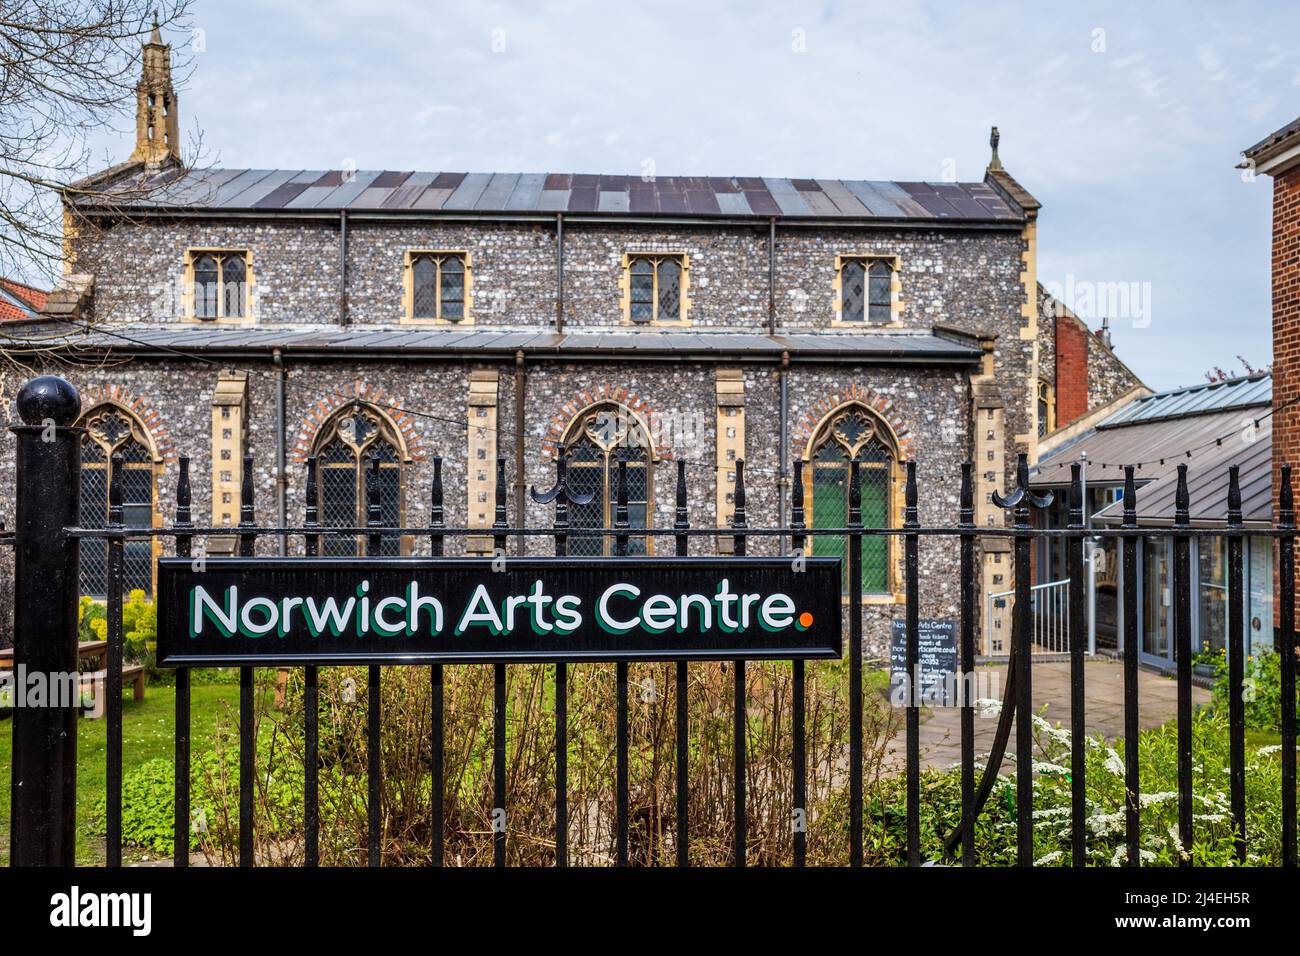 Norwich Arts Centre - live music venue, art gallery and theatre located in the  St Swithin's church building in St. Benedict's Street in Norwich. Stock Photo